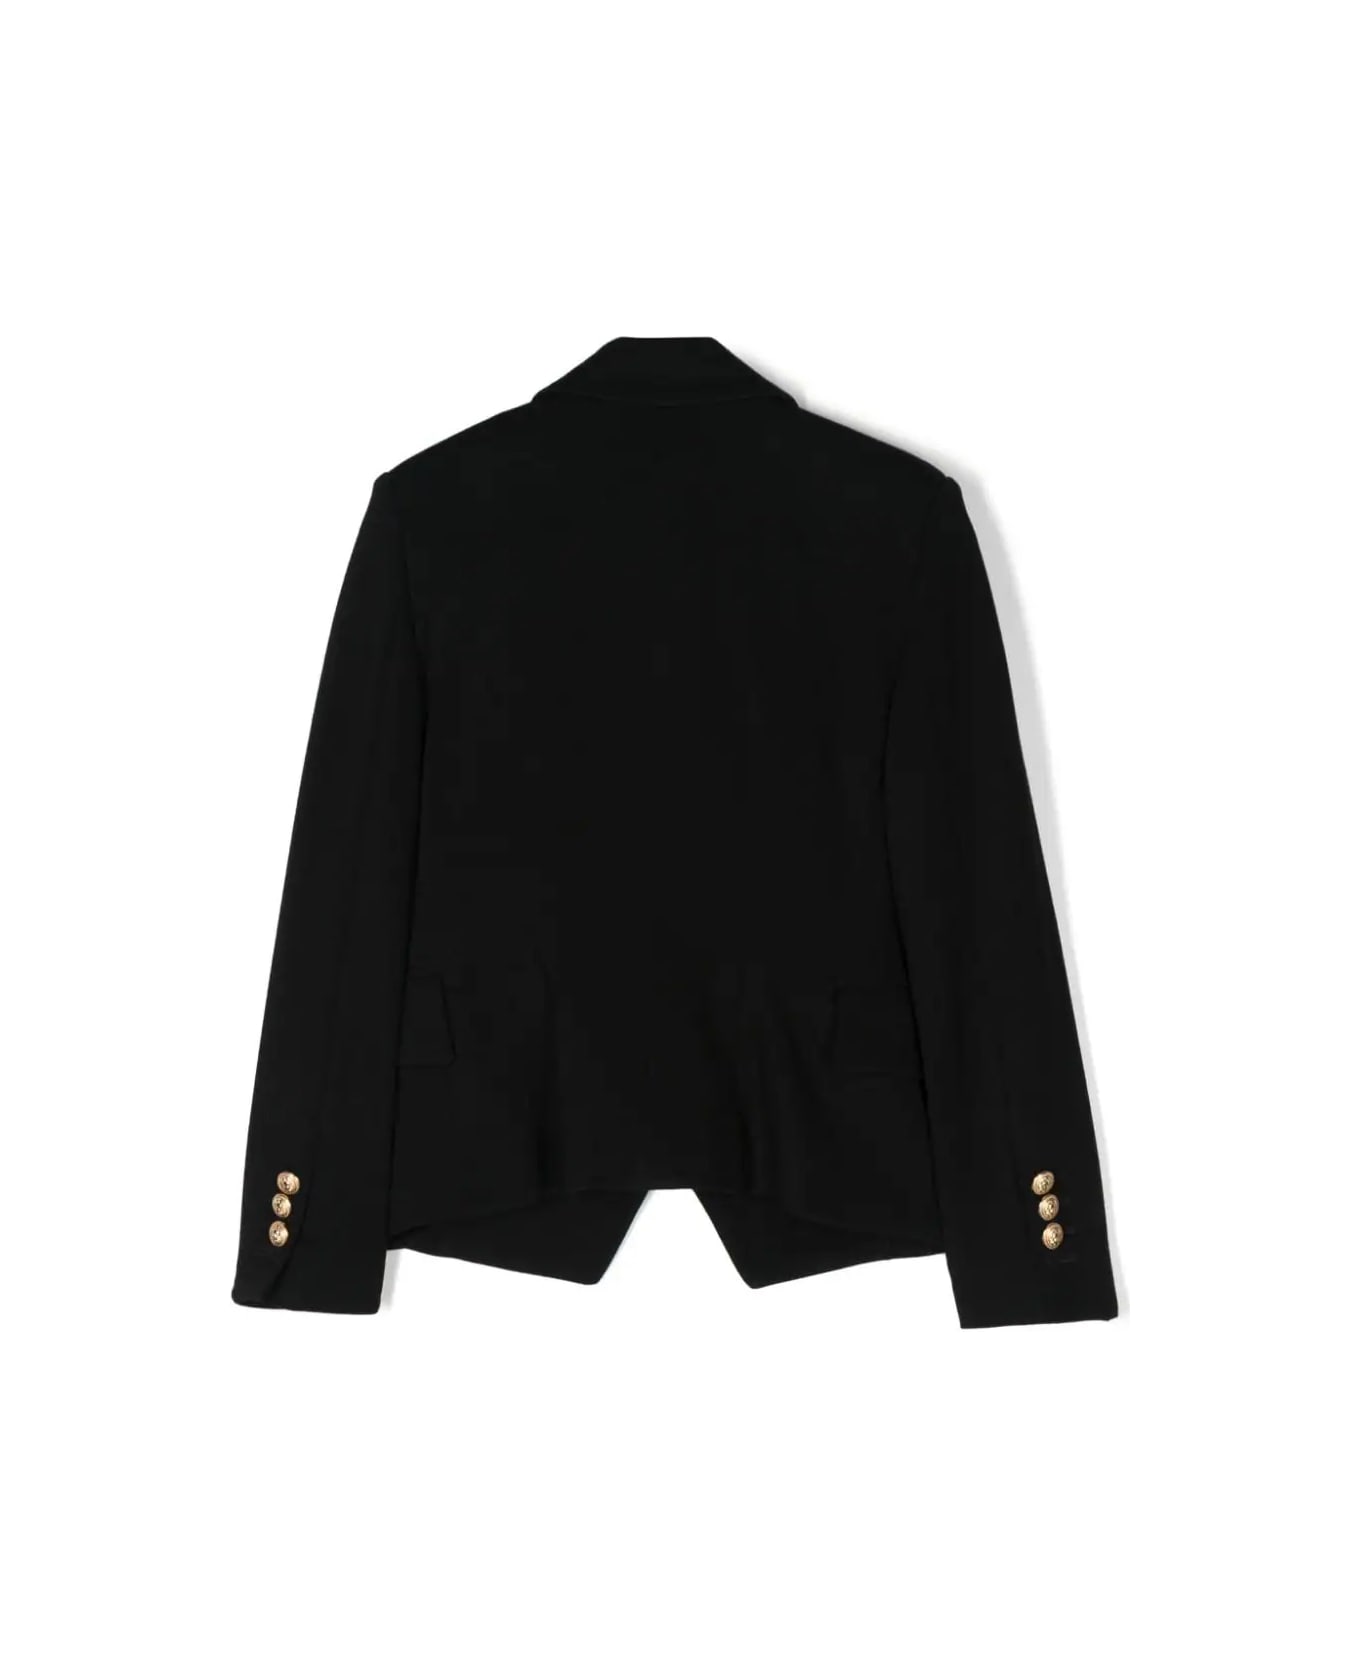 Balmain Black Double-breasted Blazer With Gold Buttons - Black